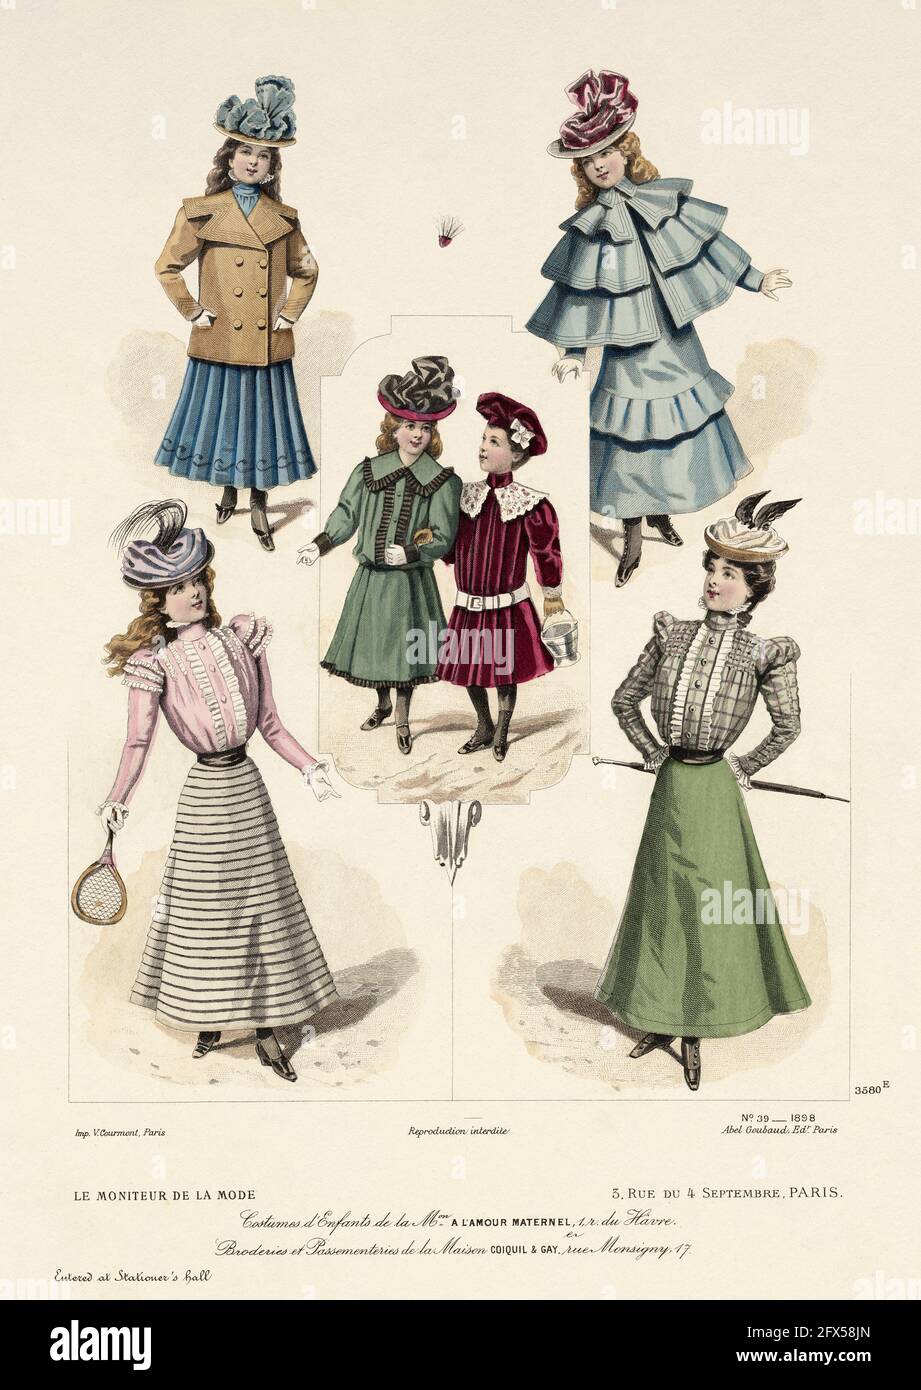 Children's costumes from Maison A l'Amour Maternel & Embroidery and trimmings from Maison Coiquil & Gay. The latest fashions designed and tailored for the dressmaker and seamstress of Moniteur de la mode, Paris 1898. France, Europe. Old color lithograph from the late XIX century Stock Photo